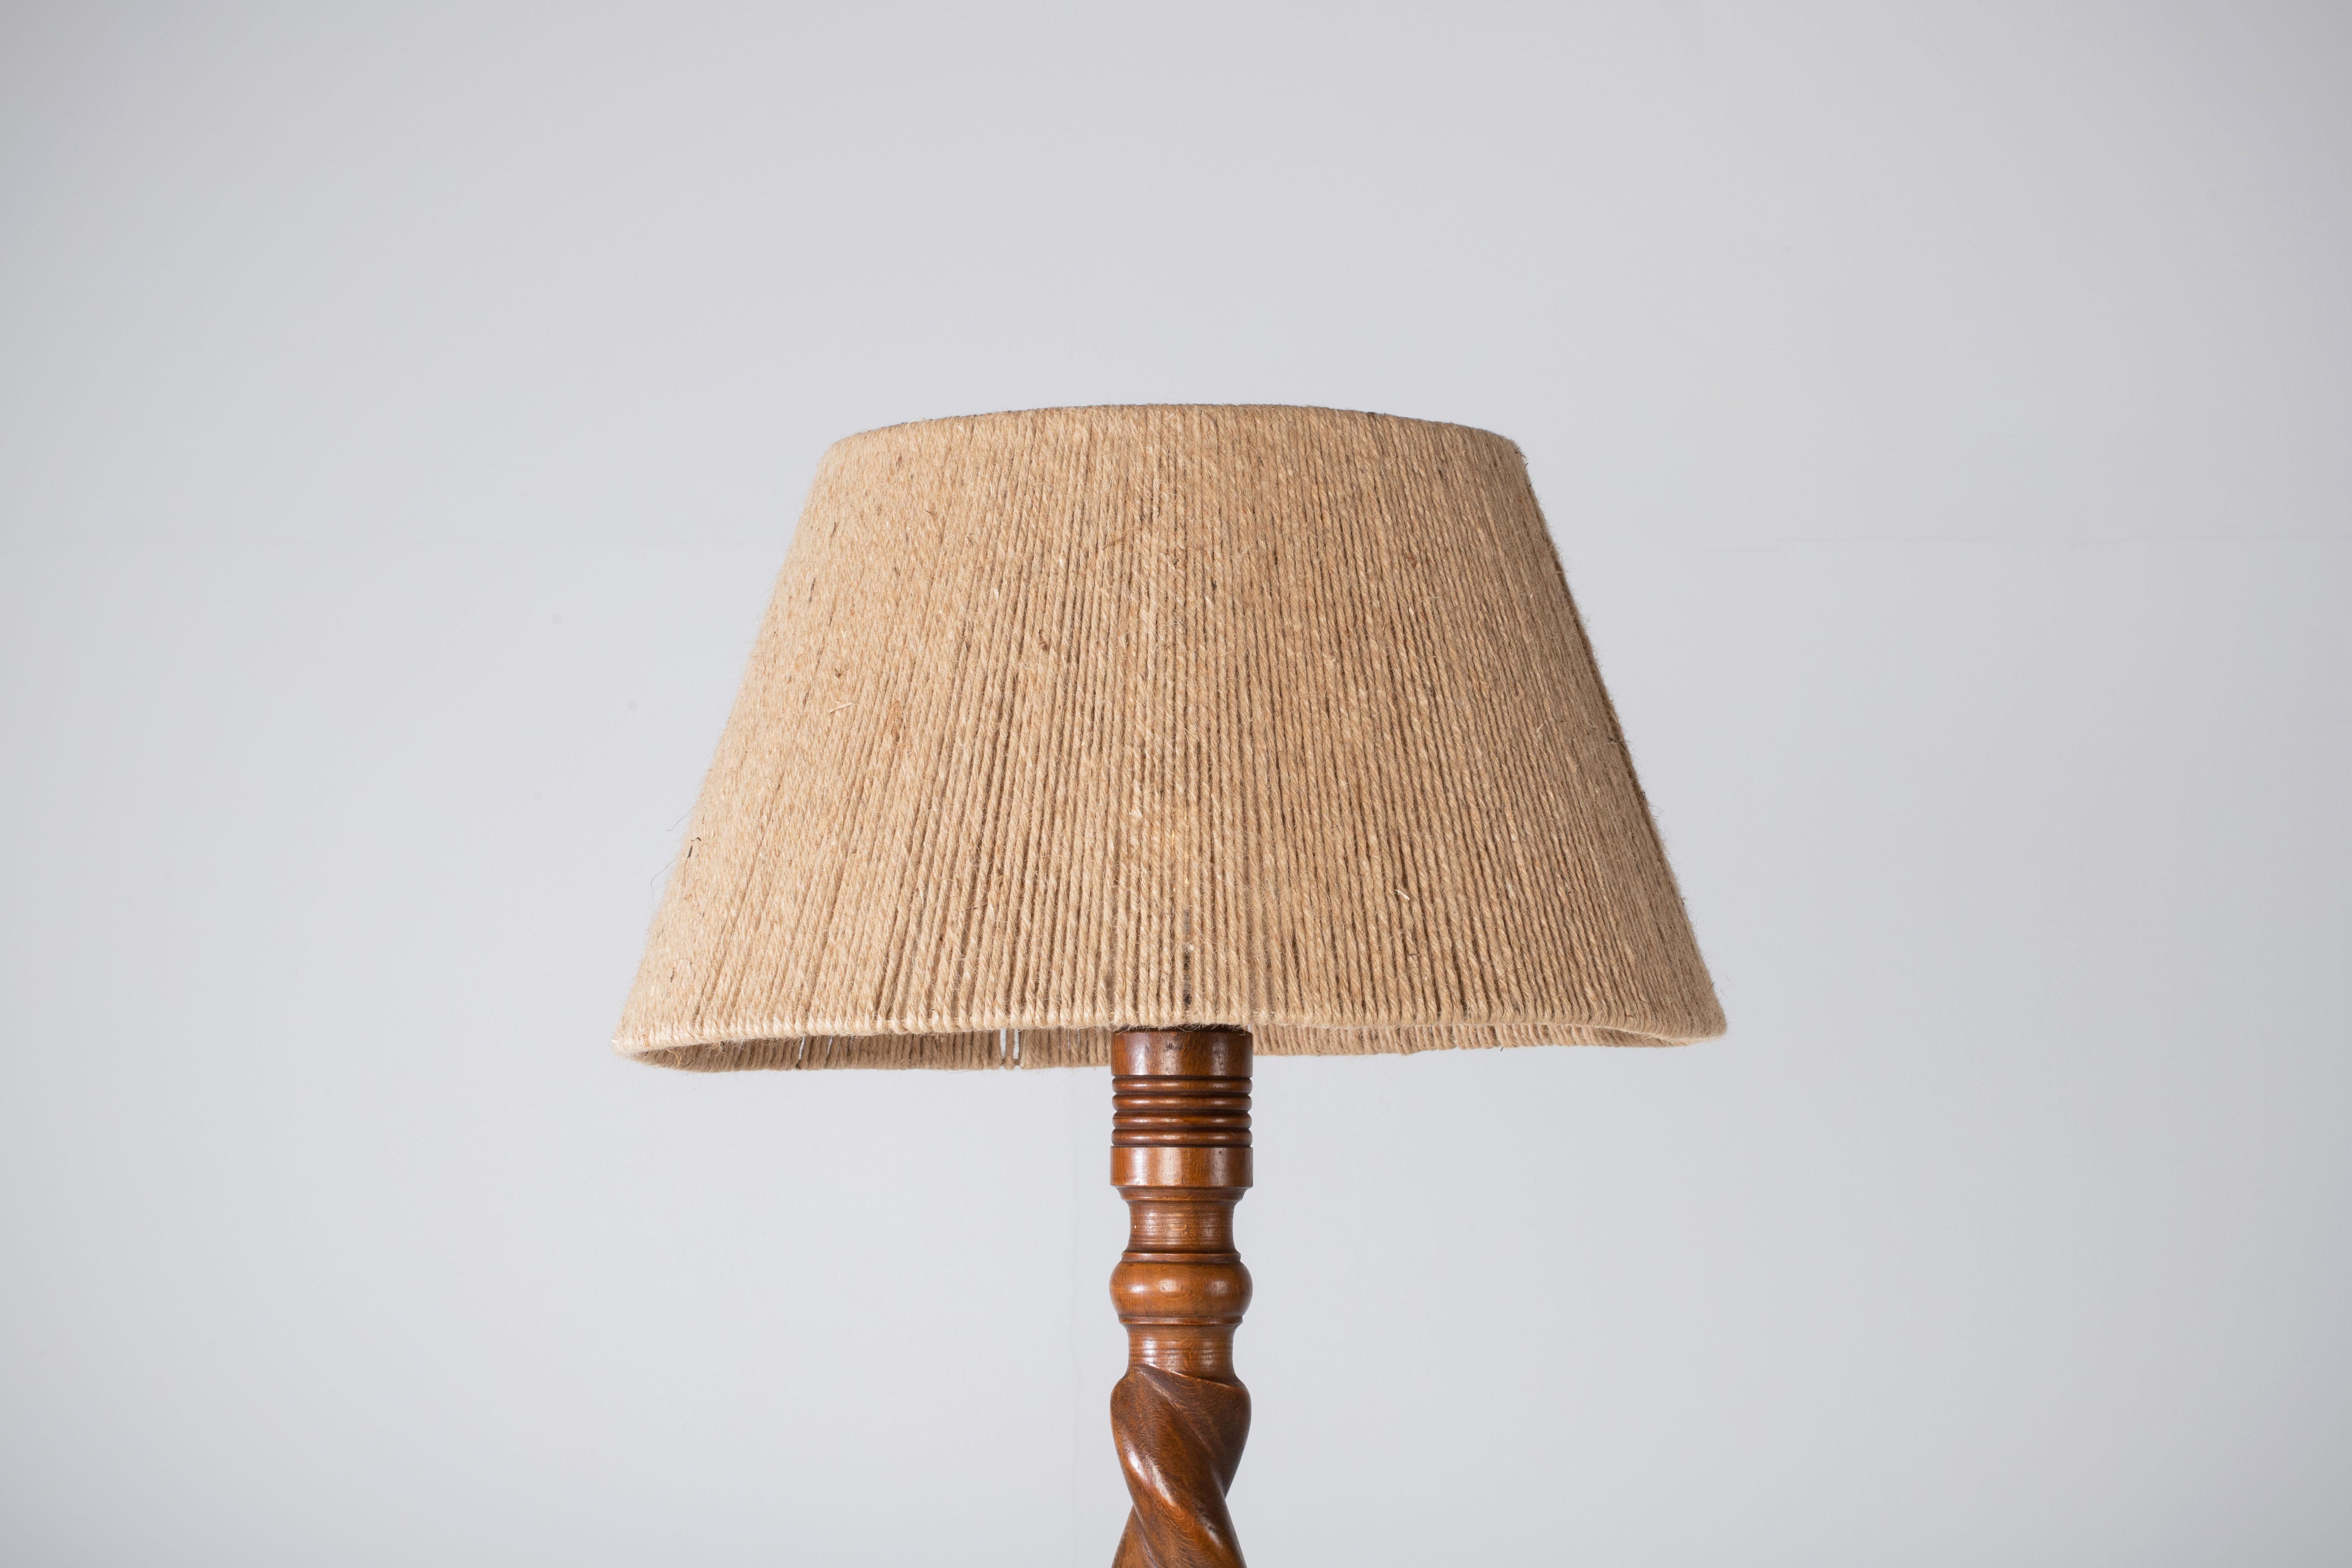 Twisted Oak Floor Lamp with Rope Lampshade, France 1940 In Good Condition For Sale In Wiesbaden, DE